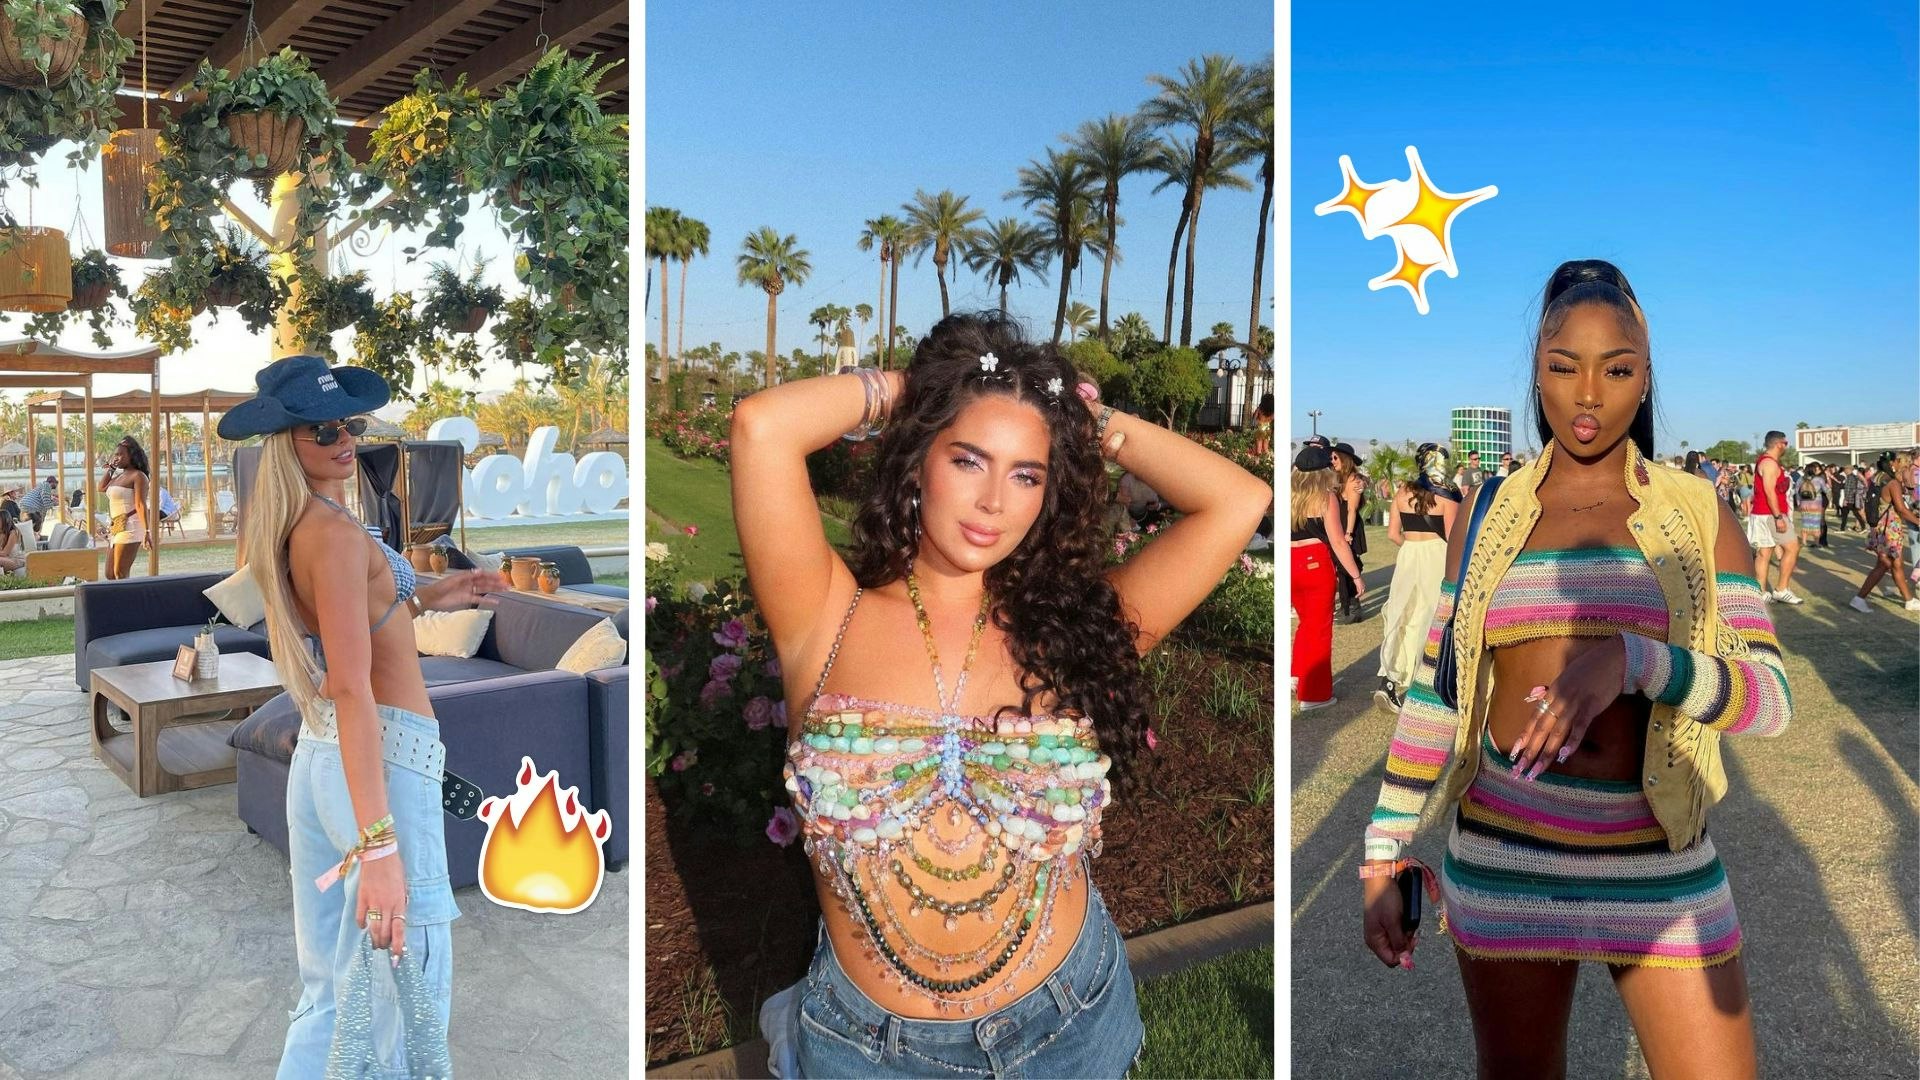 https://images.bauerhosting.com/celebrity/sites/4/2022/07/best-coachella-outfits-heat-what-to-wear-to-a-festival-1.jpg?ar=16%3A9&fit=crop&crop=top&auto=format&w=undefined&q=80